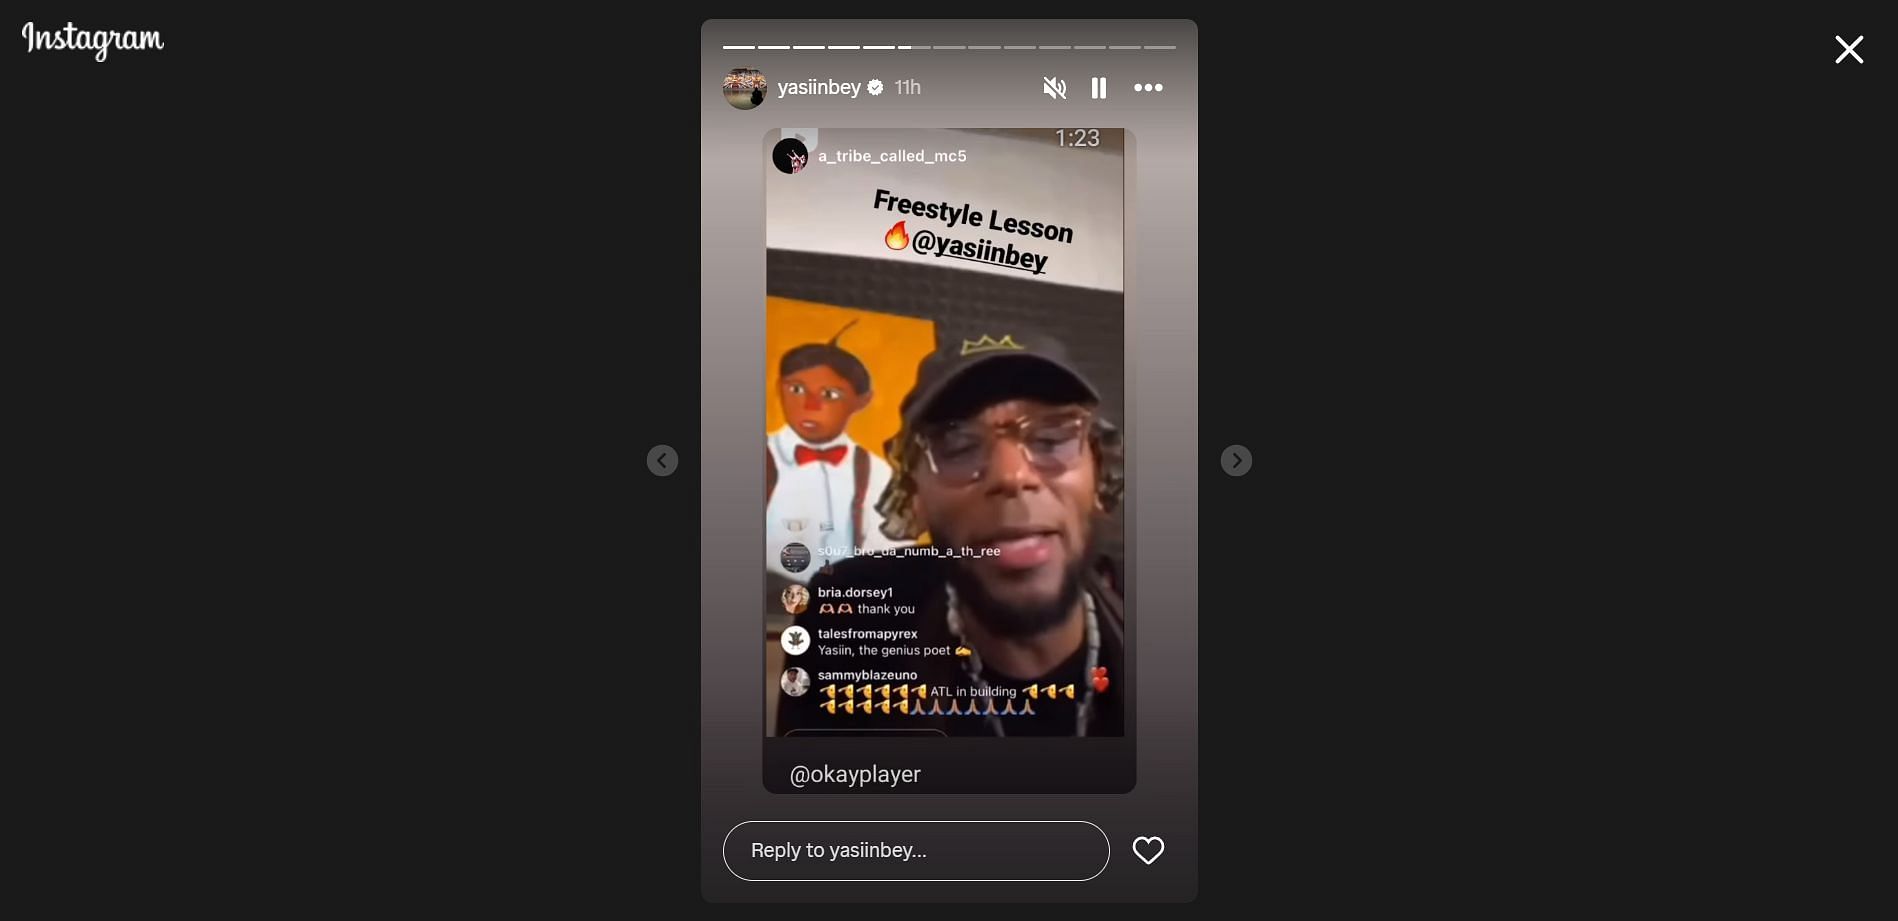 Yasiin Bey reposted the live story of his freestyle on Instagram story (Image via Instagram/@yasiinbey)